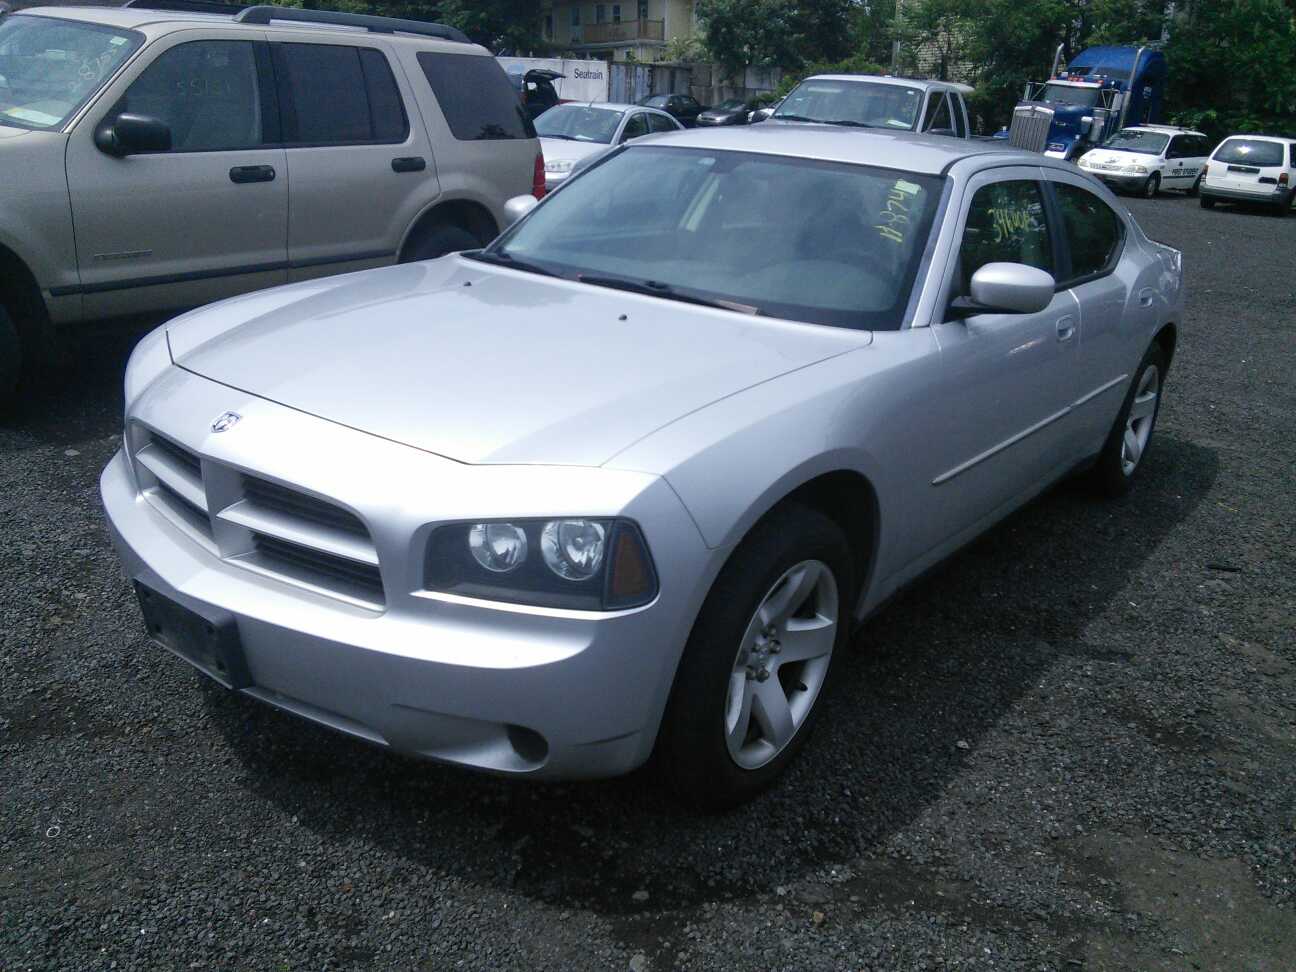 2008 Dodge Charger, Valued at $6,809